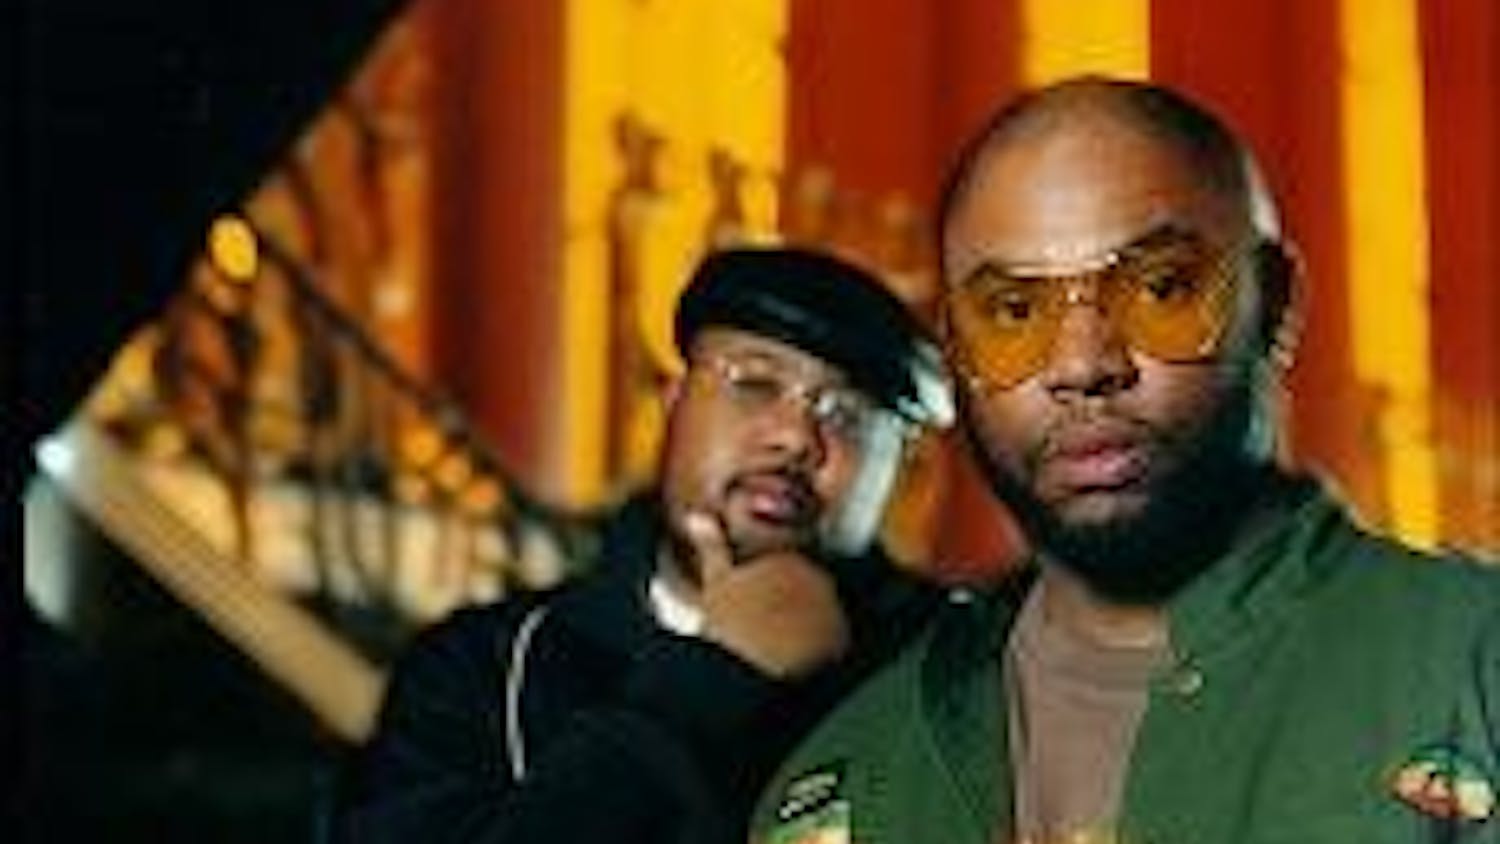 Rap duo Blackalicious drew a large crowd for their show at the Tavern Friday night.